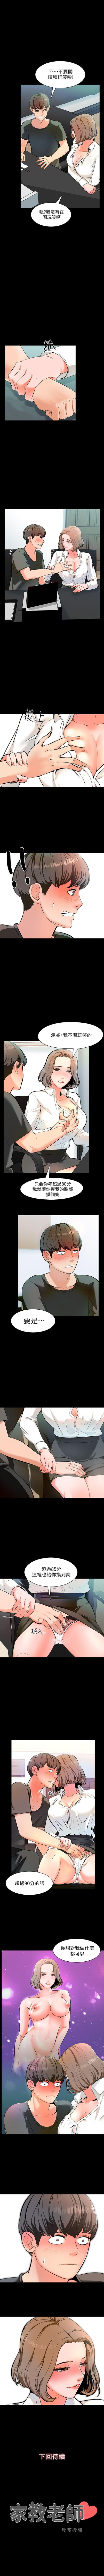 Super 家教老師 1-40 官方中文（連載中） Tight Cunt - Page 7